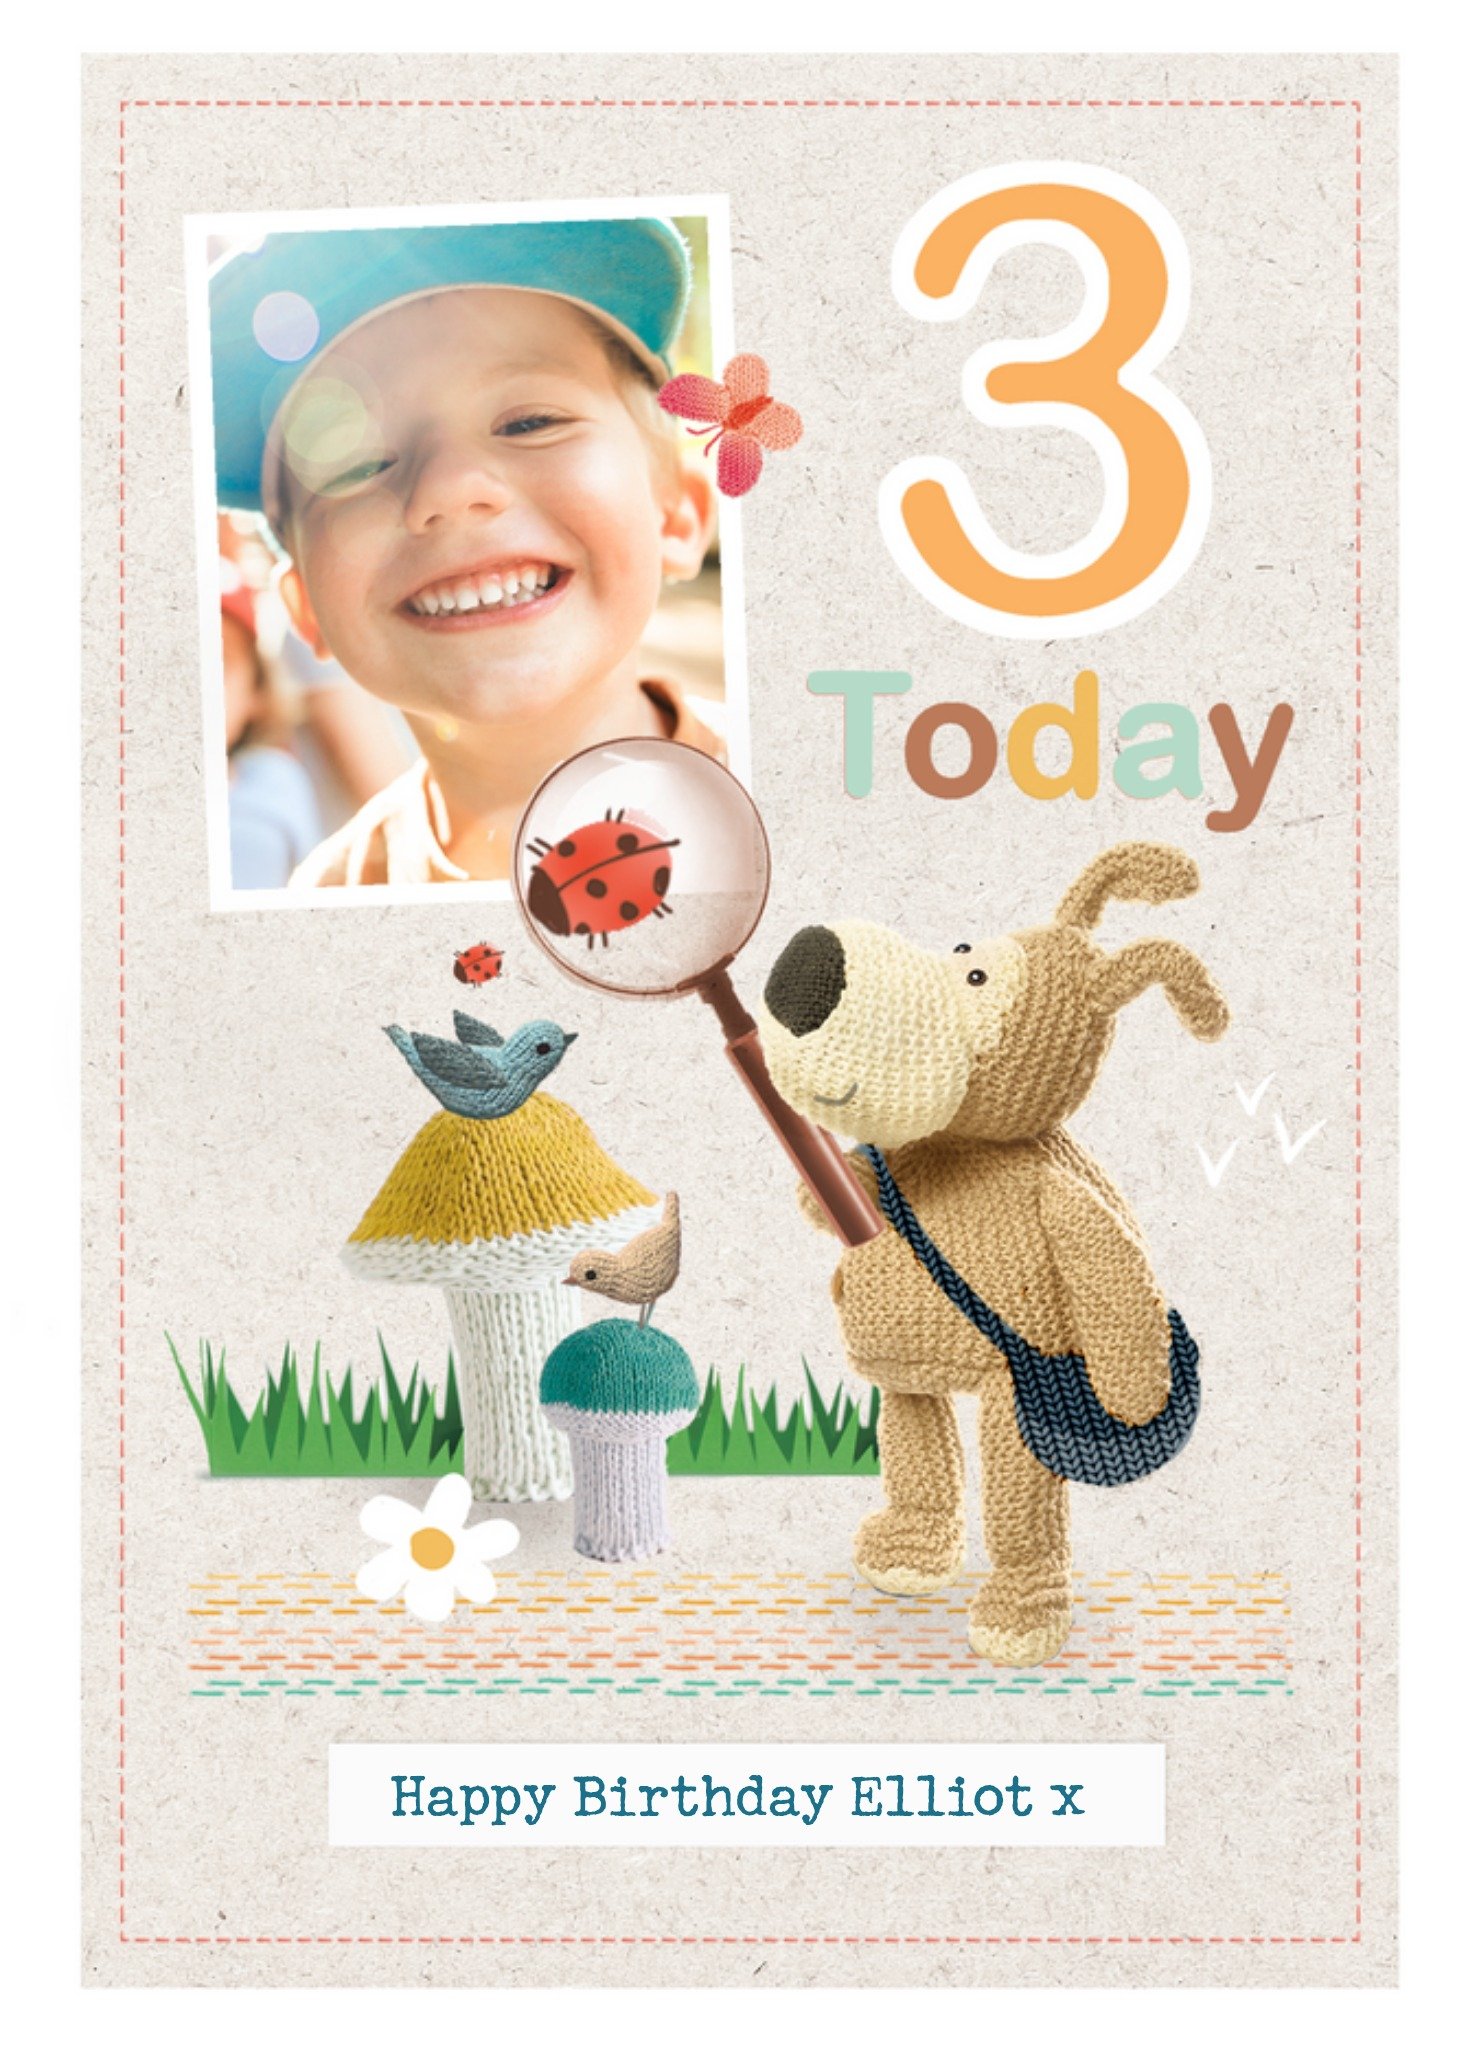 Boofle 3 Today Personalised Card, Large